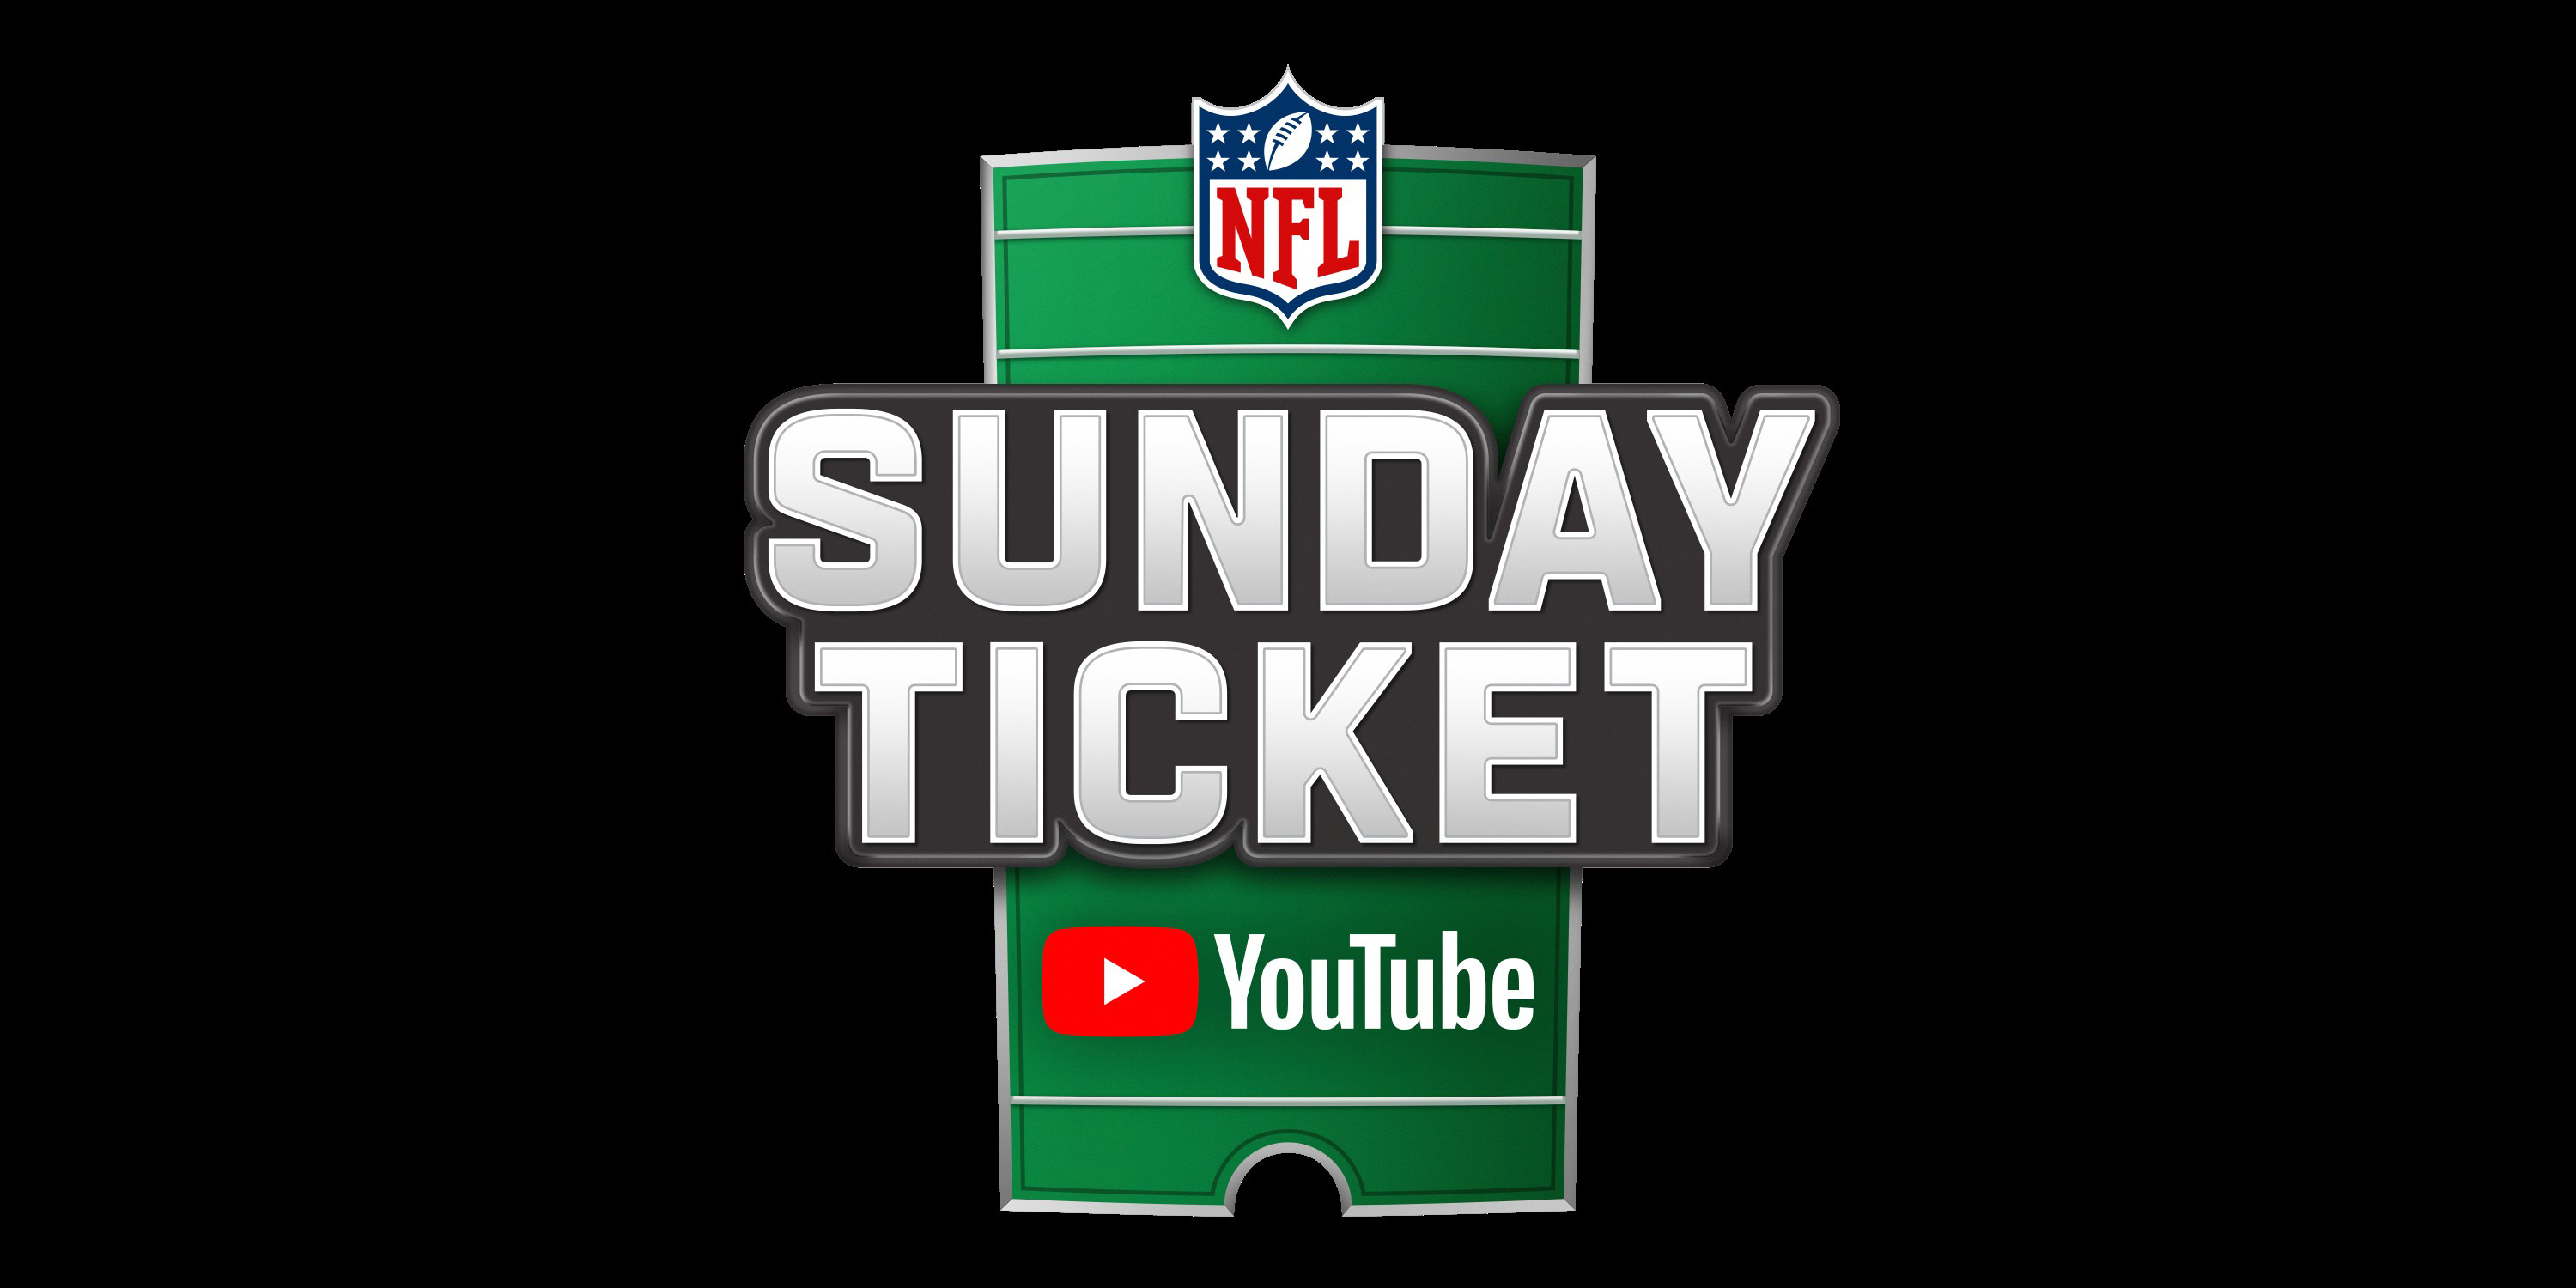 Verizon is footing your NFL Sunday Ticket bill on YouTube TV if you upgrade